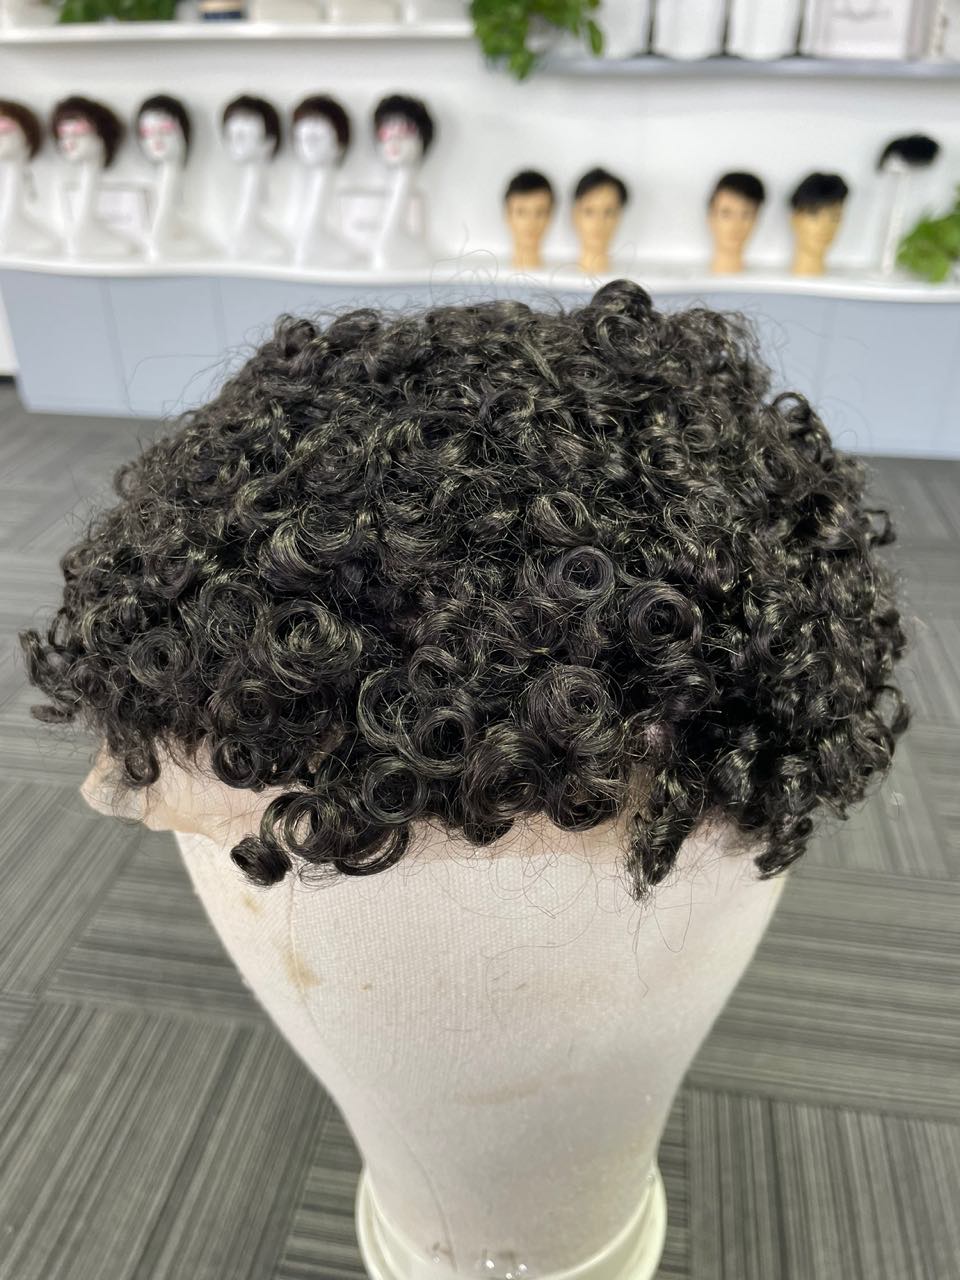 Wear To Go 15MM Curly Human Hair Systems For Men Replacement Swiss Full Lace Toupee Hairpieces For Balding Crown With Fashion Hairstyle Wholesale